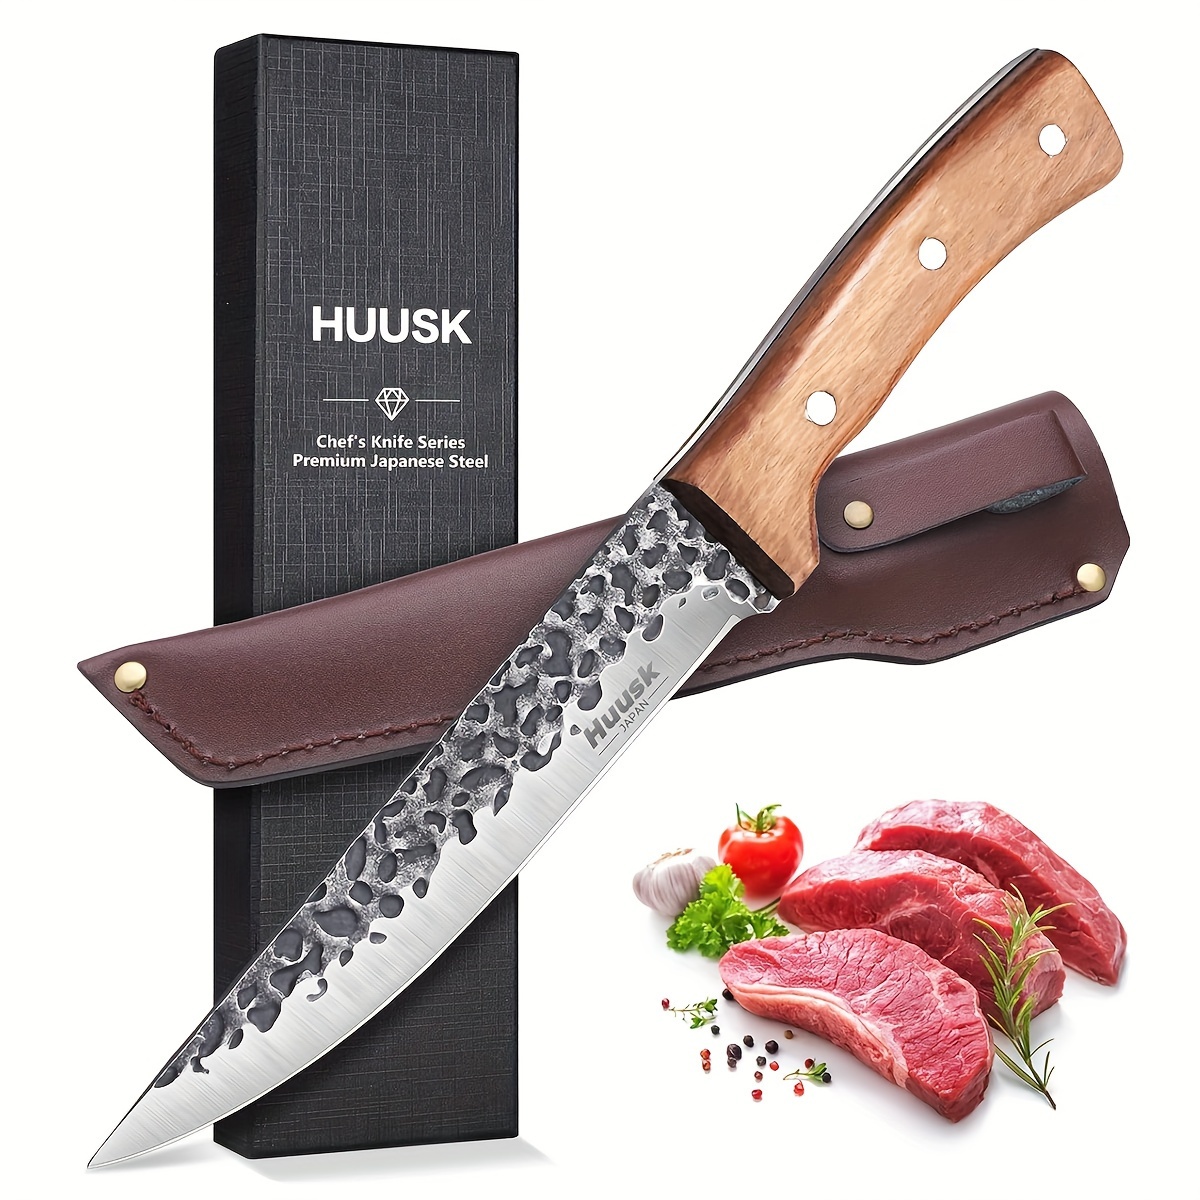 

Knives From Japan, Boning Knife For Meat Cutting 6 Inch, Butcher Knife For Brisket Trimming, Viking Knife With Sheath, Full Tang Kitchen Utility Knife, Christmas Gift